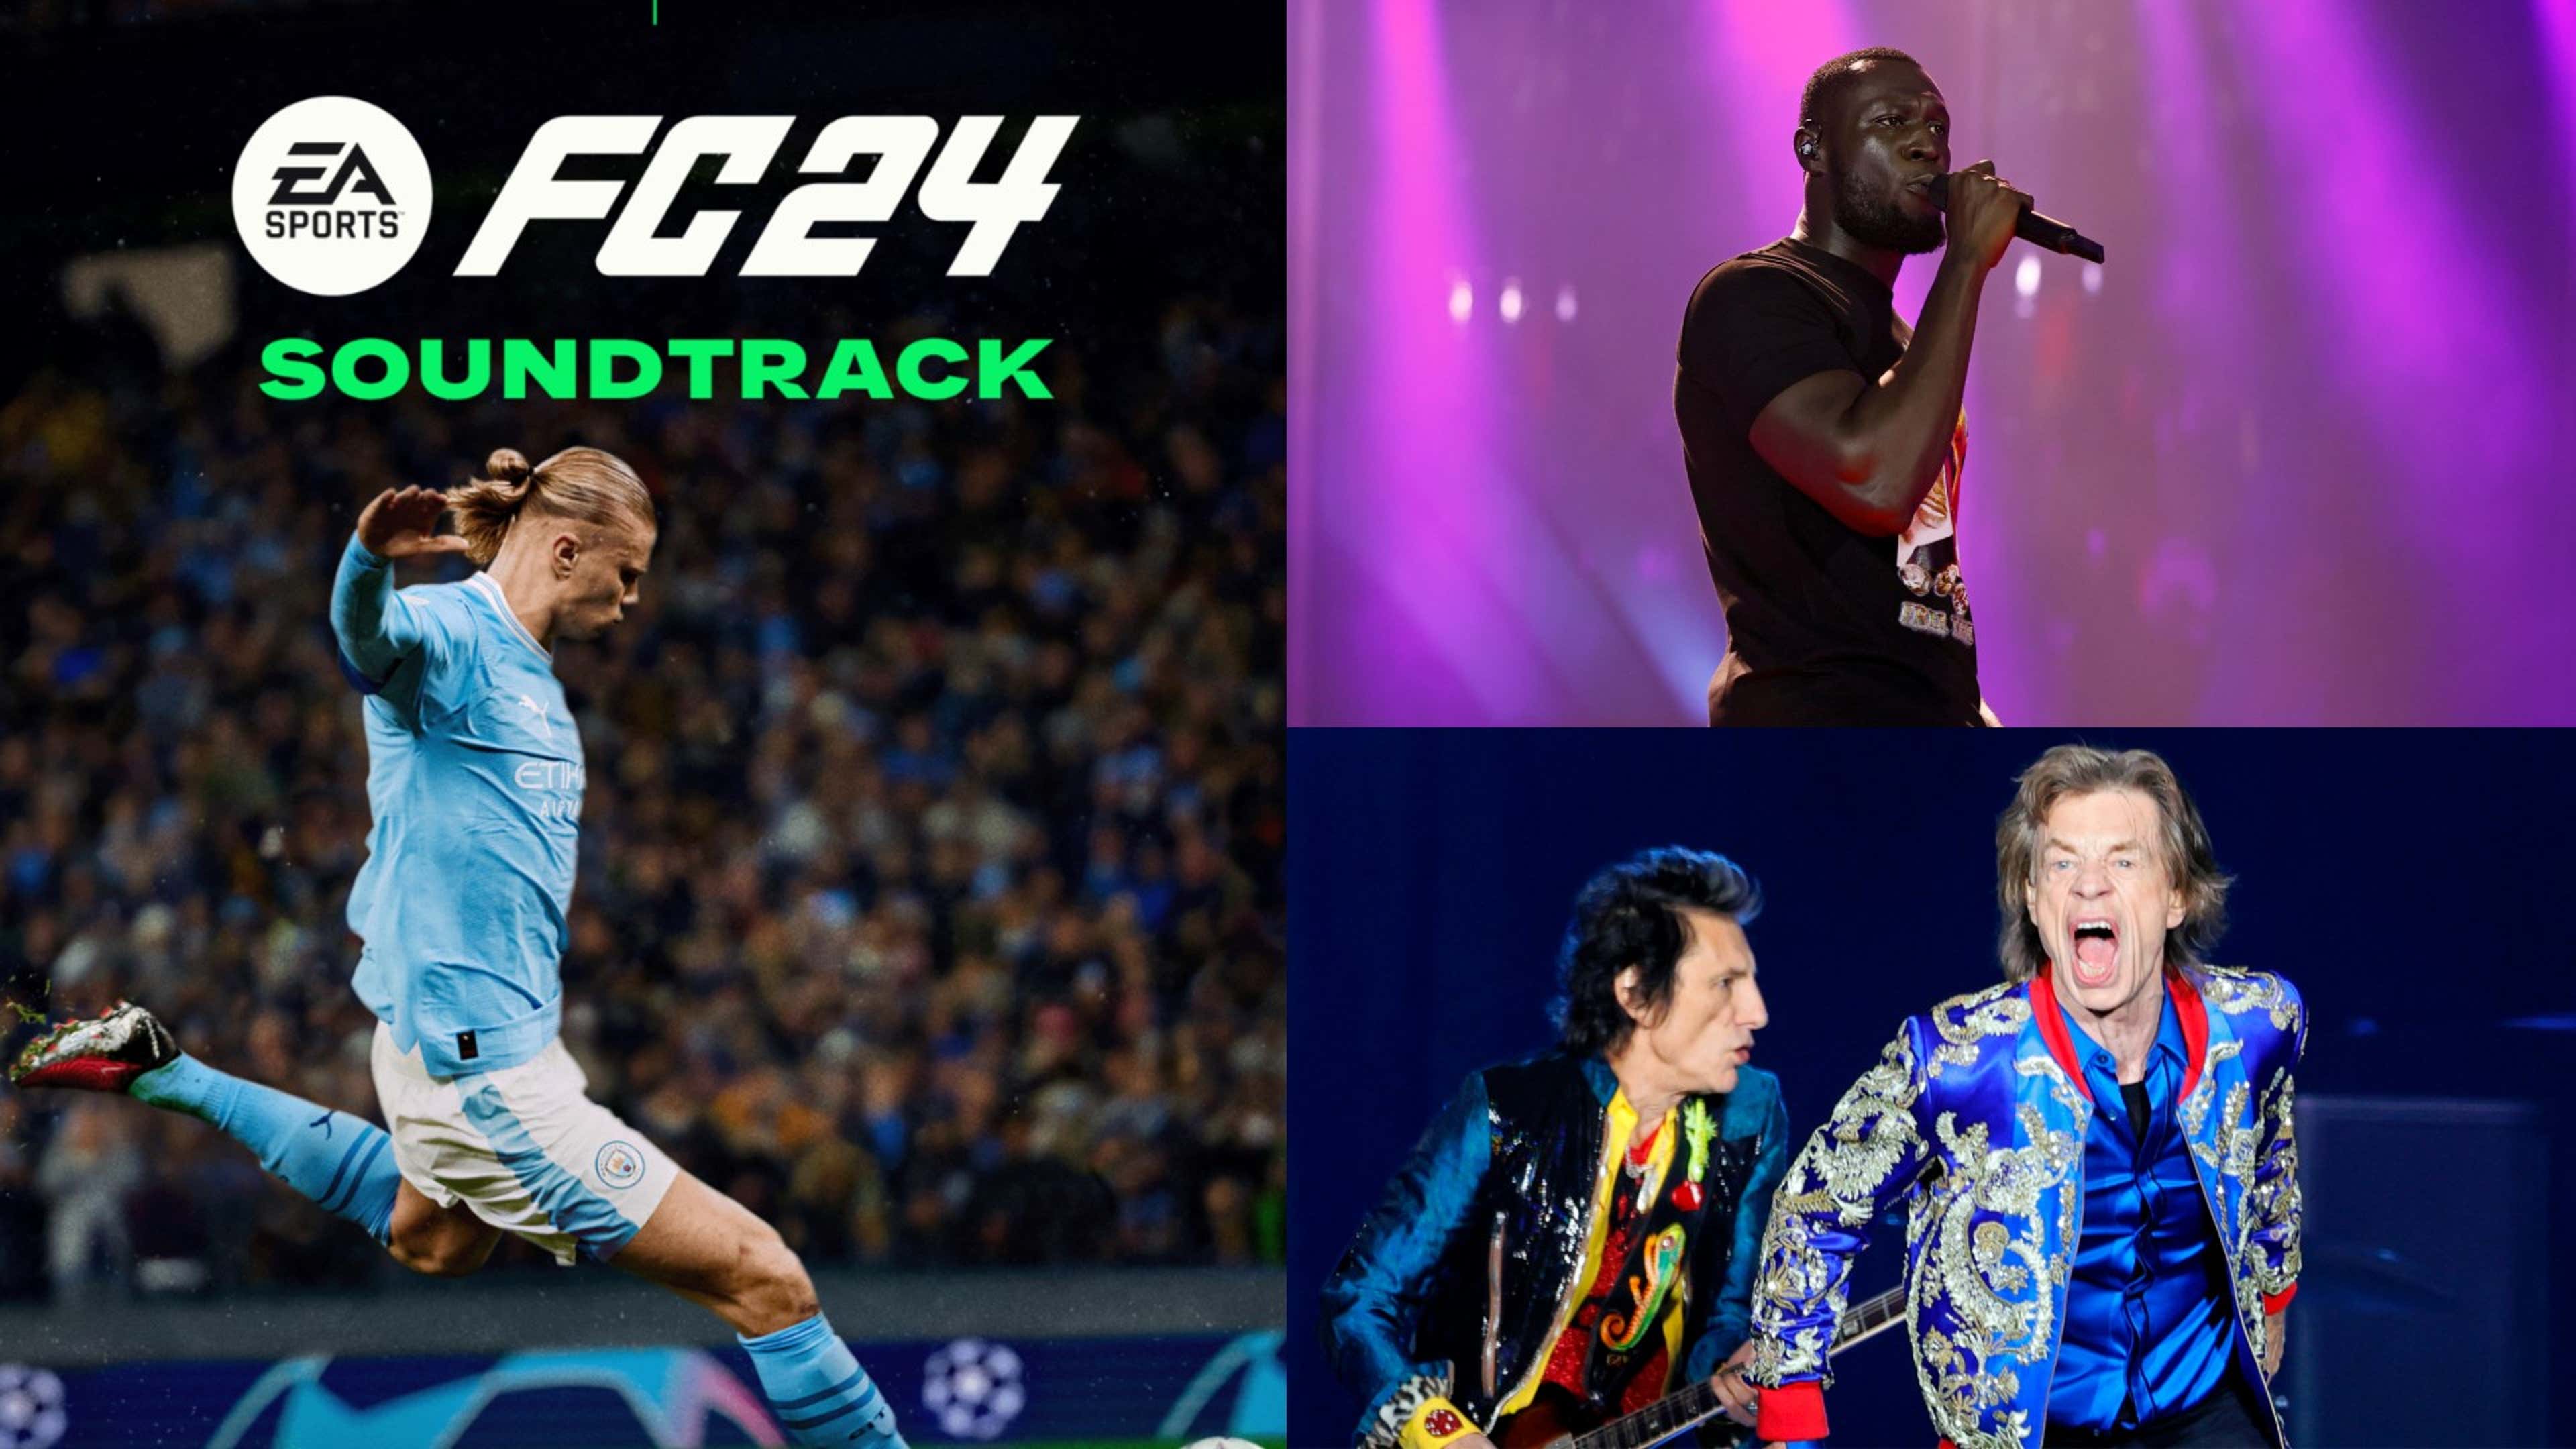 EA Sports FC 24 soundtrack: Songs, artists & music in new football